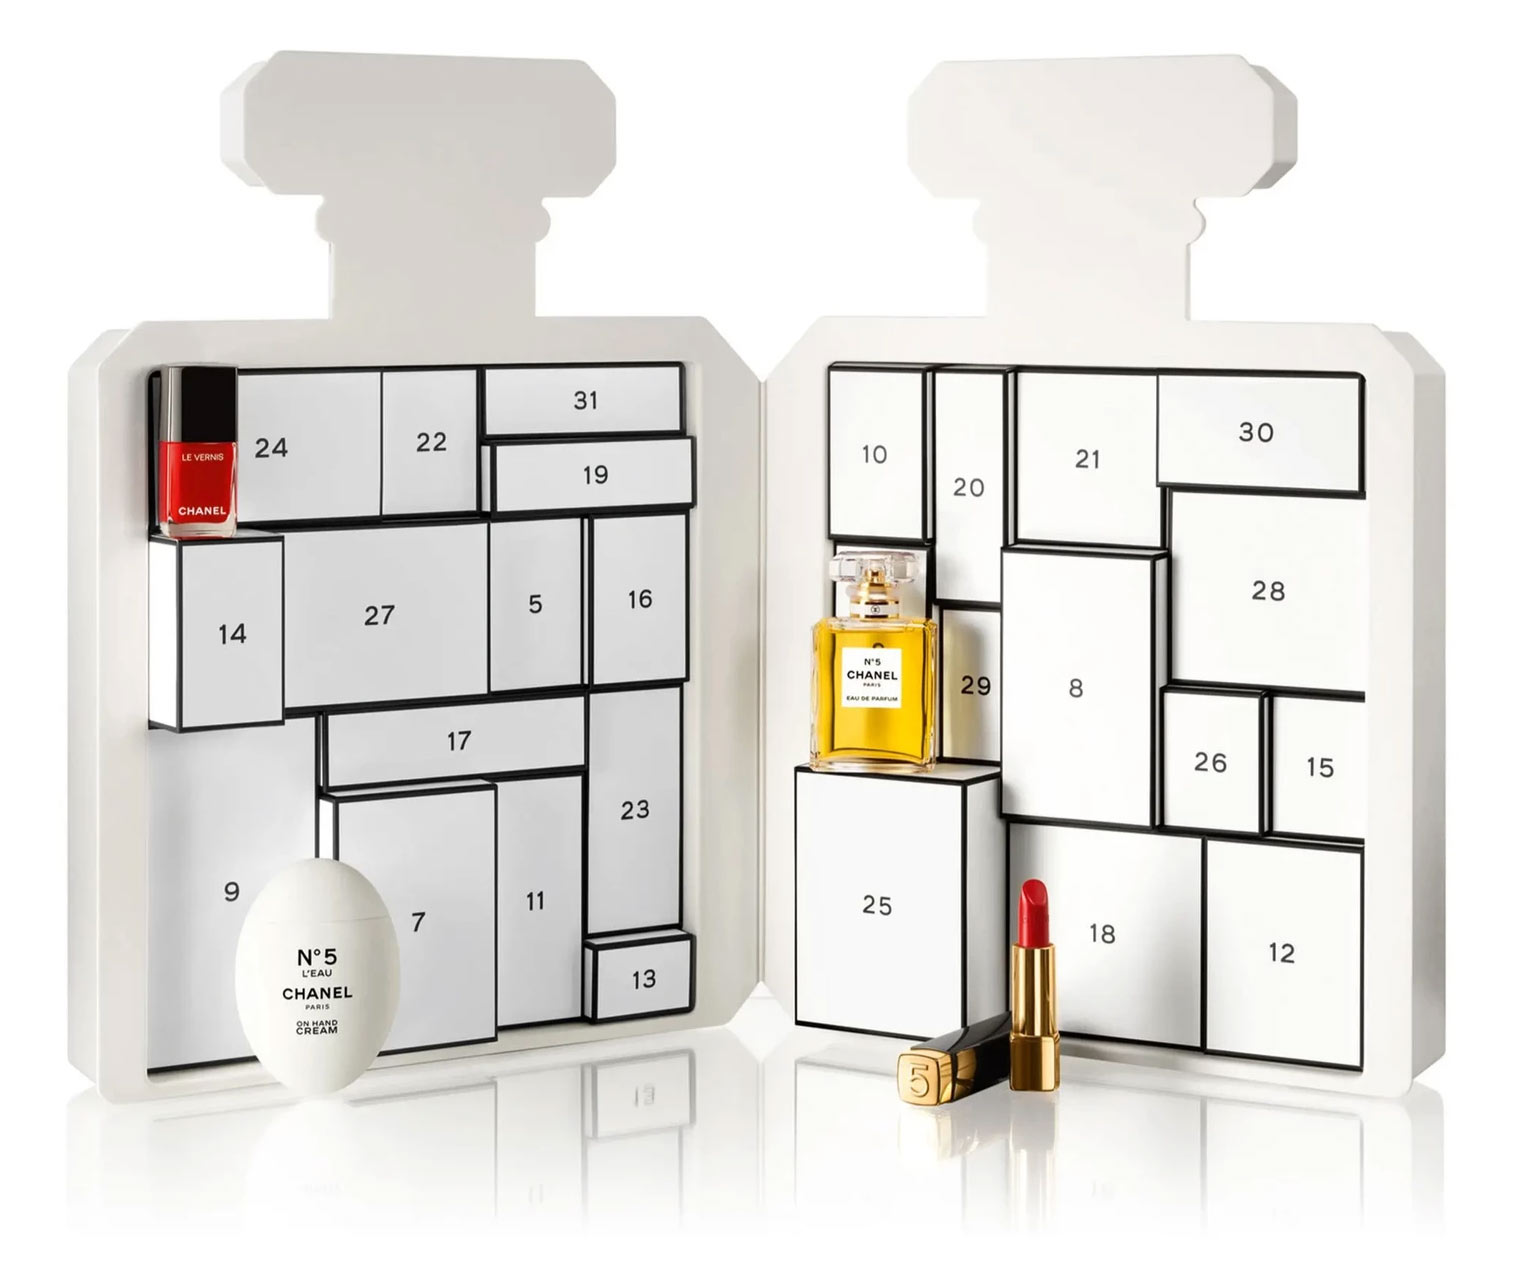 Chanel's US$825 Advent Calendar Contains Items Like Stickers